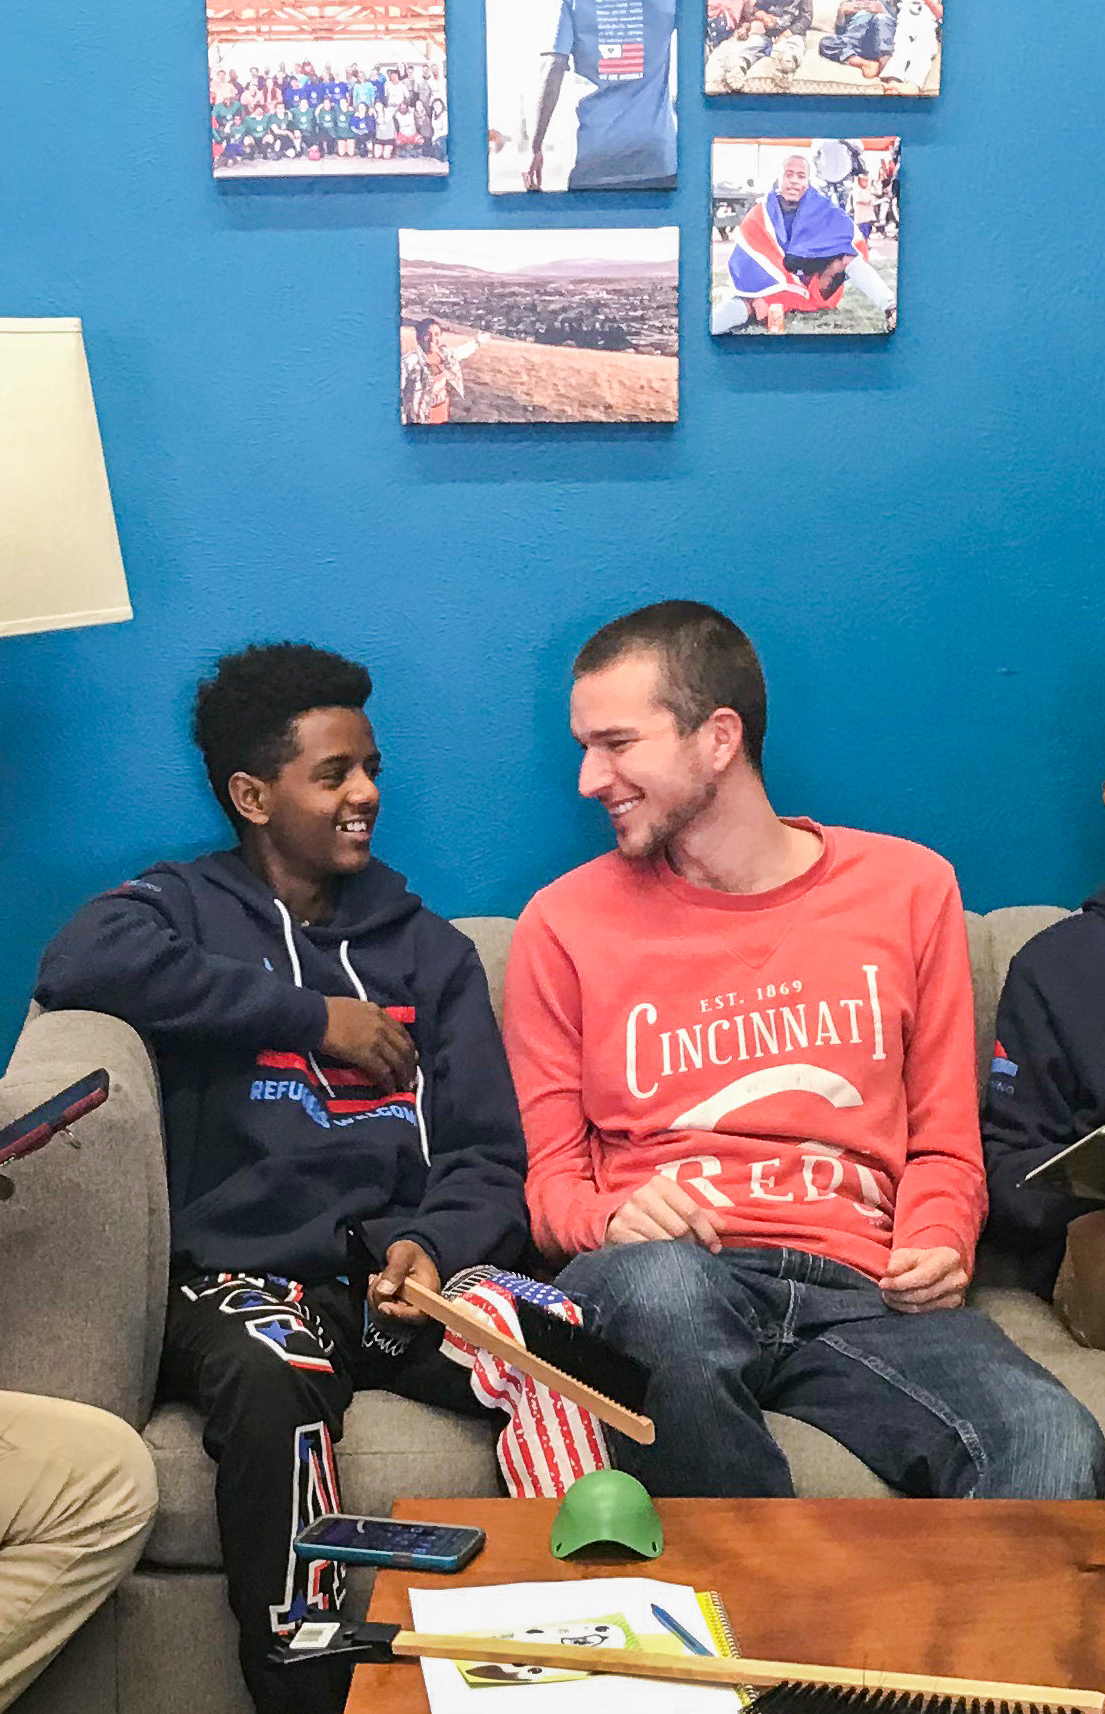 Chase hanging out with a refugee teen during after school tutoring